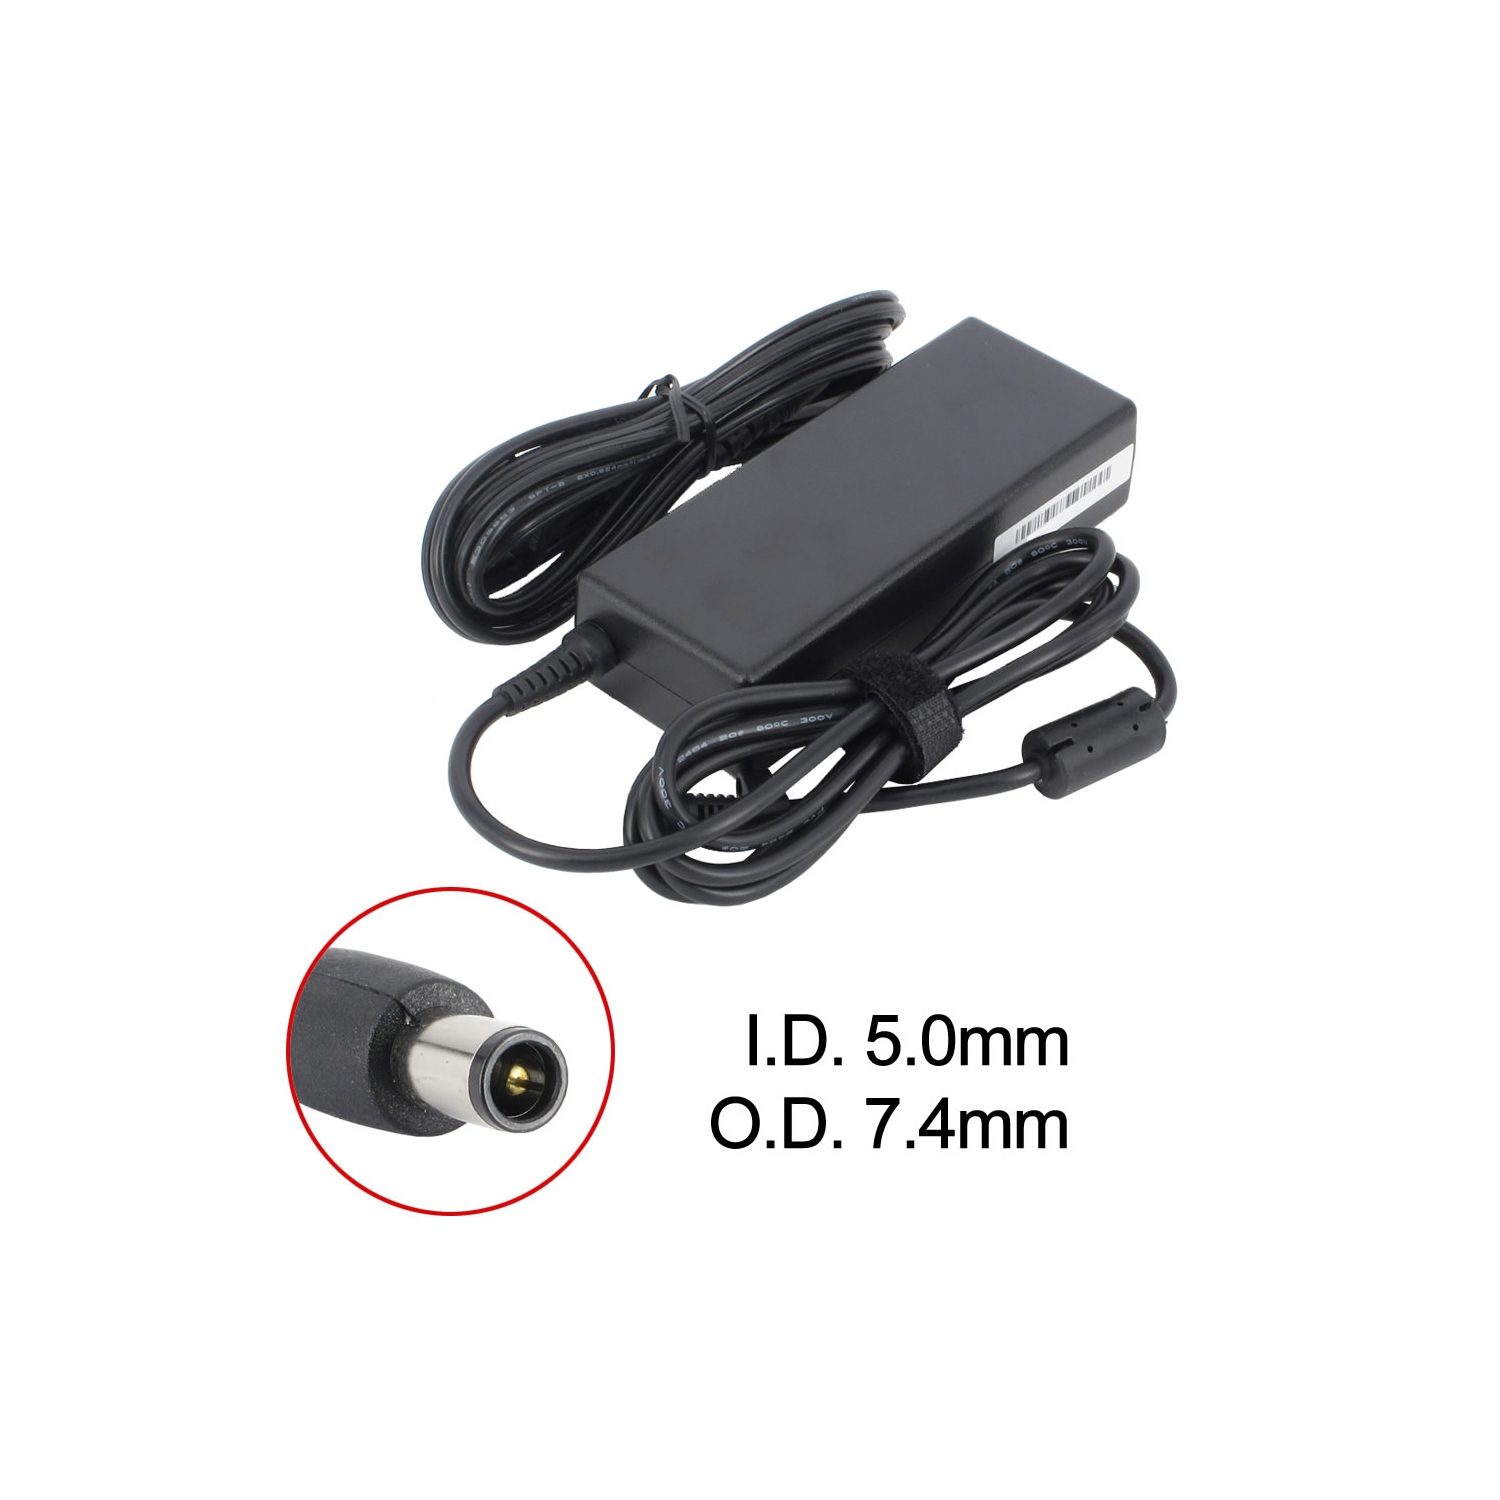 BATTDEPOT New Laptop AC Adapter for Dell Inspiron 15 (5542) 0C120H 310-7441 310-9438 332-1831 CF989 FA90PM136 NF599 TR82J